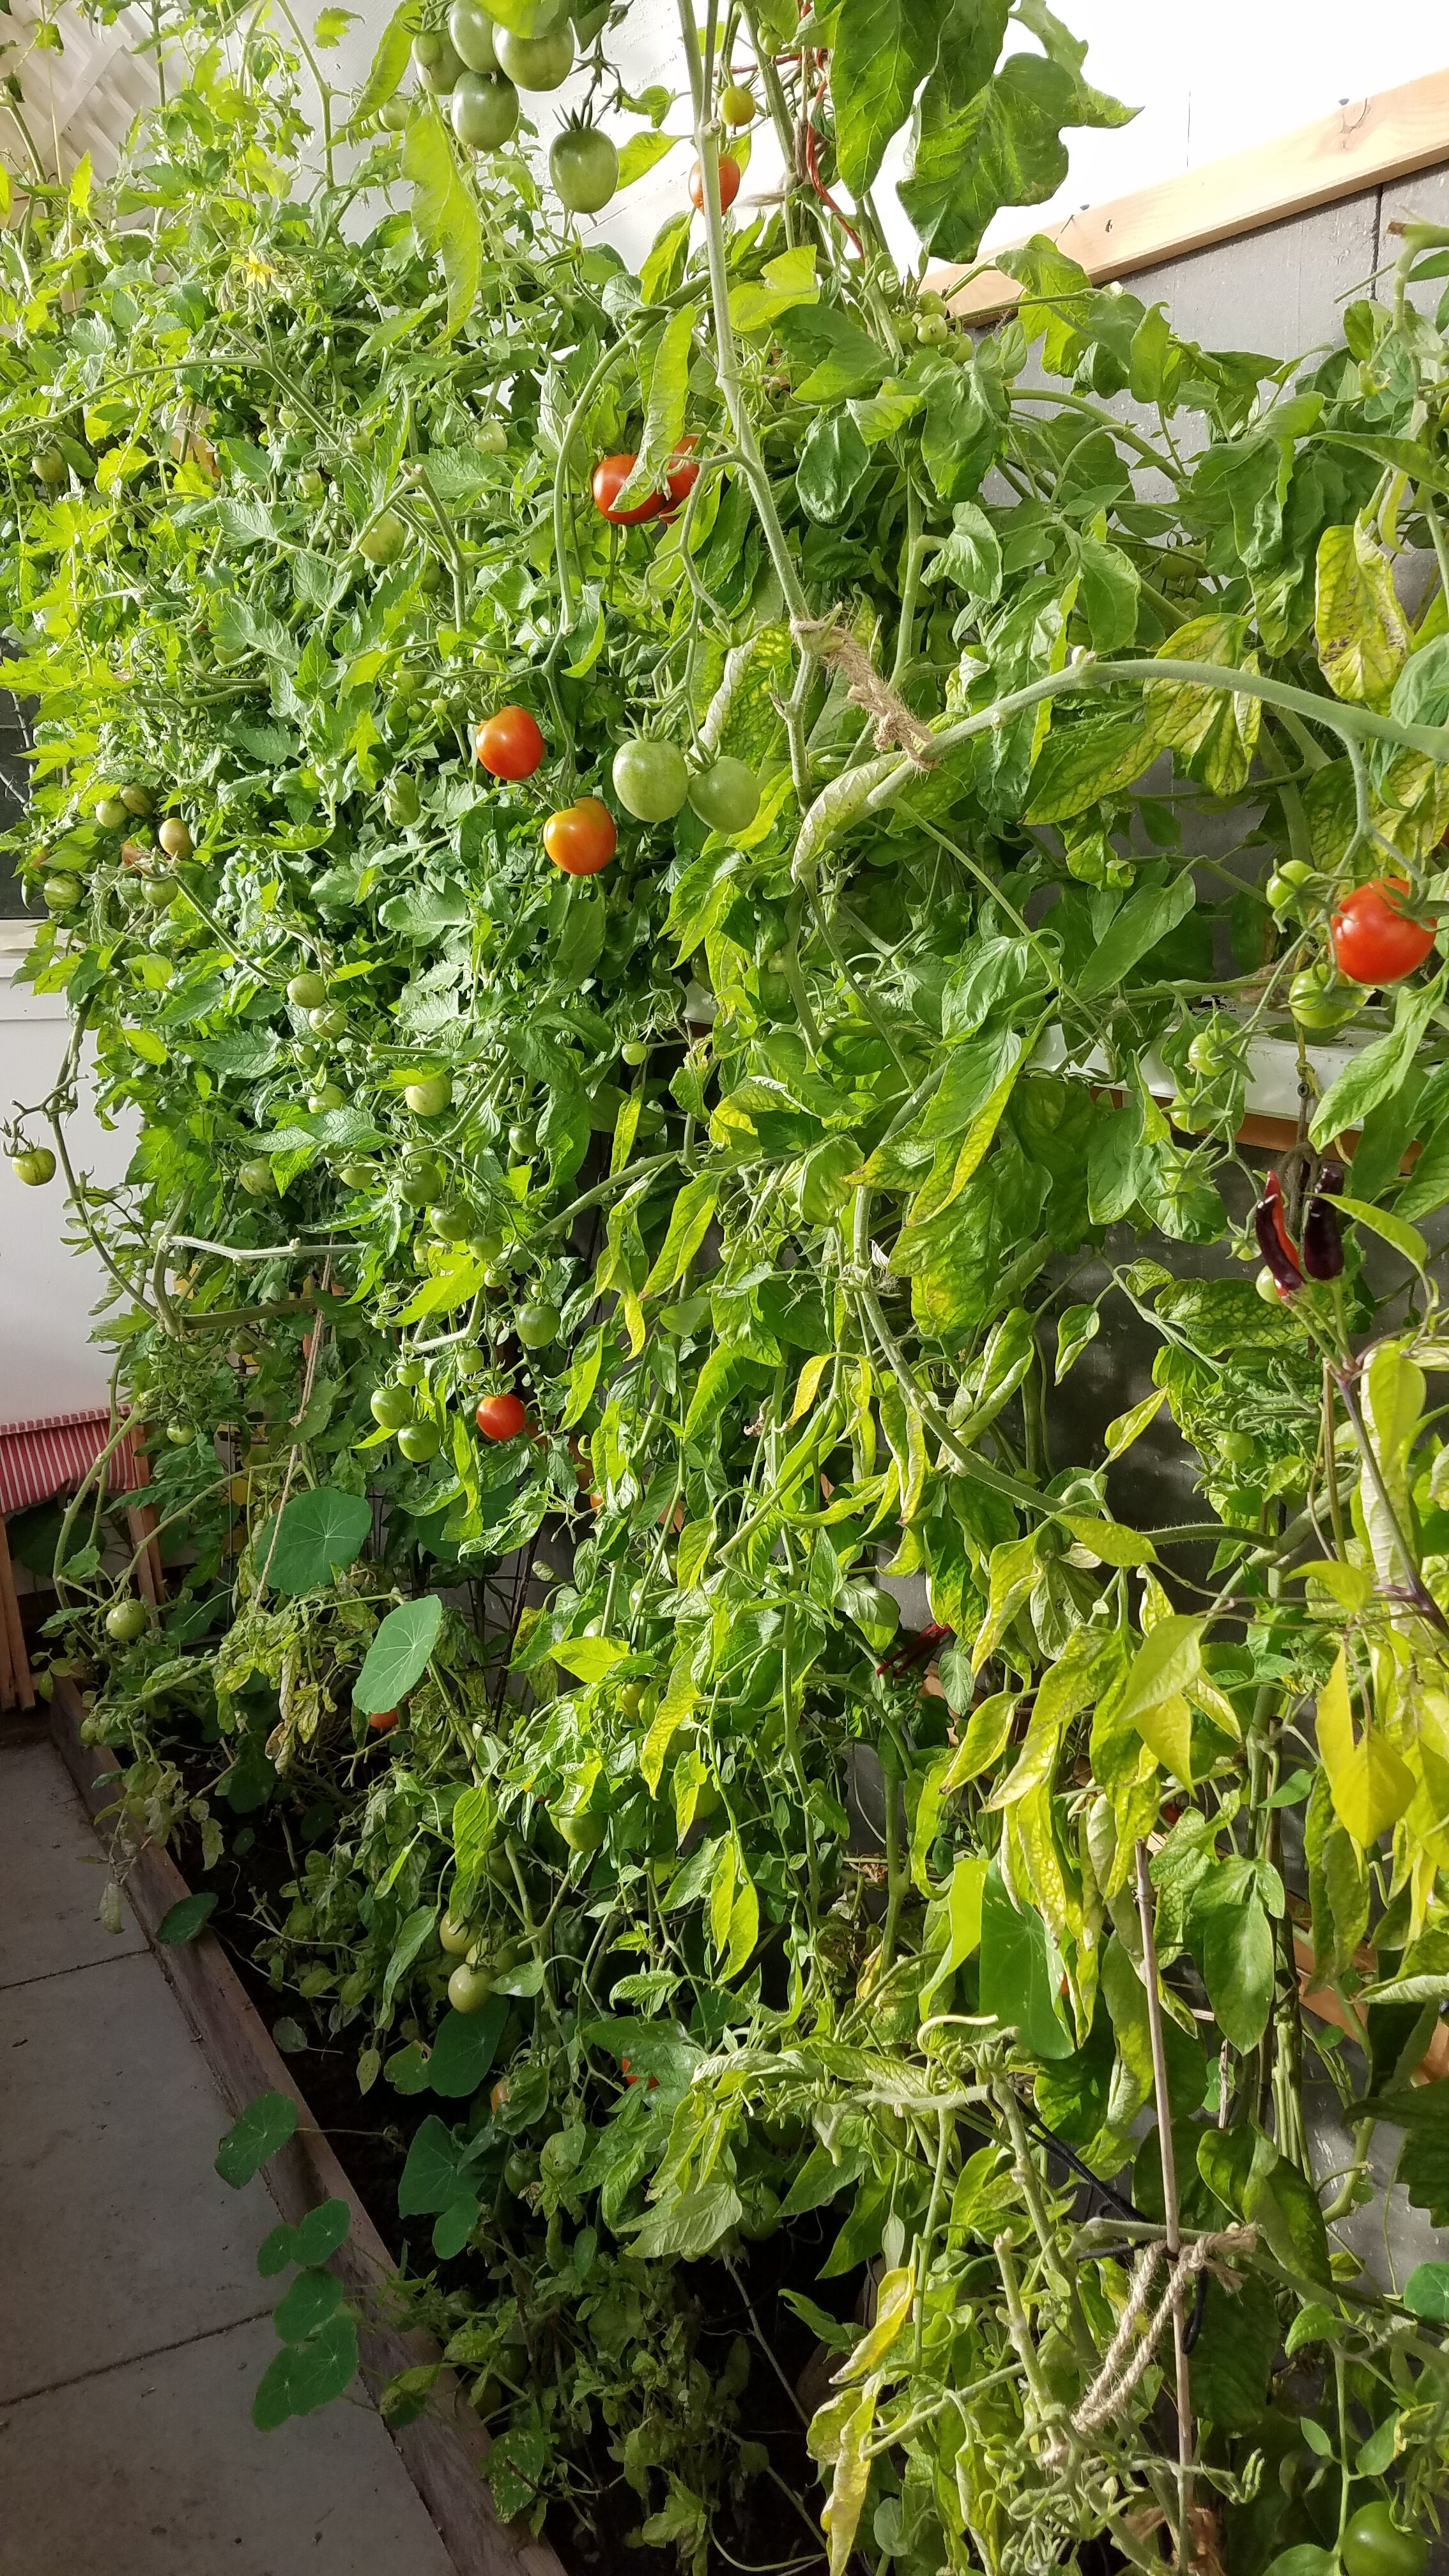 Tomatoes are still thriving on November 2nd